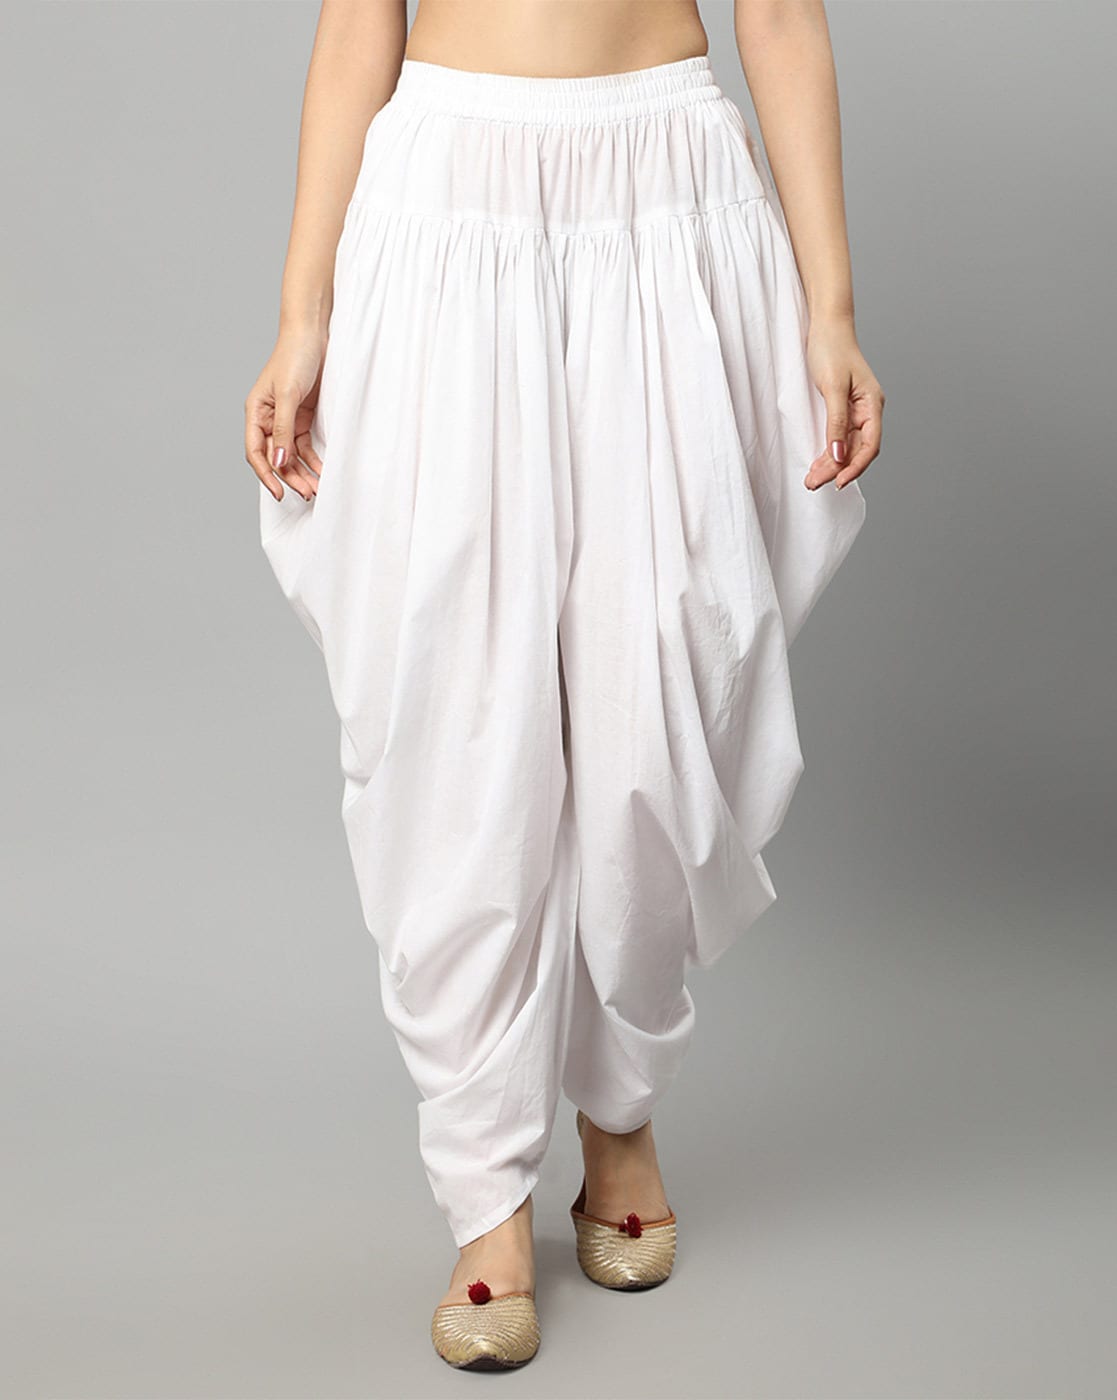 Shop Online for White Full Patiala in India at Dori